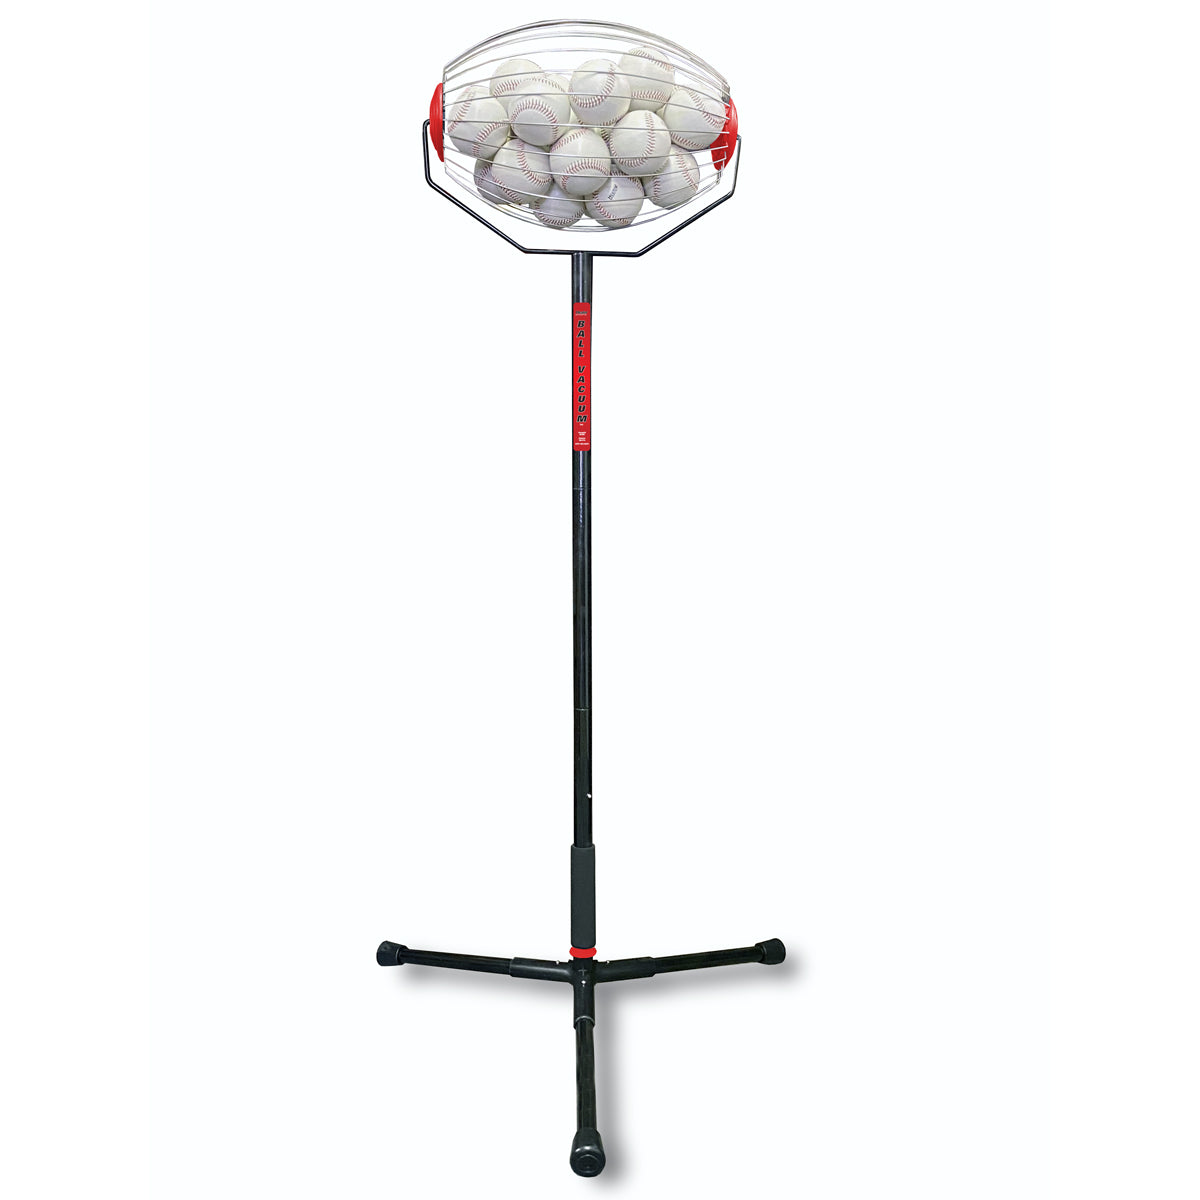 Ball Vacuum &amp; Holder - High-Strength Stainless Steel Wires - Easy Ball Retrieval - Tripod Stand - Baseballs &amp; Softballs - Heater Sports - Pitch Machine Pros